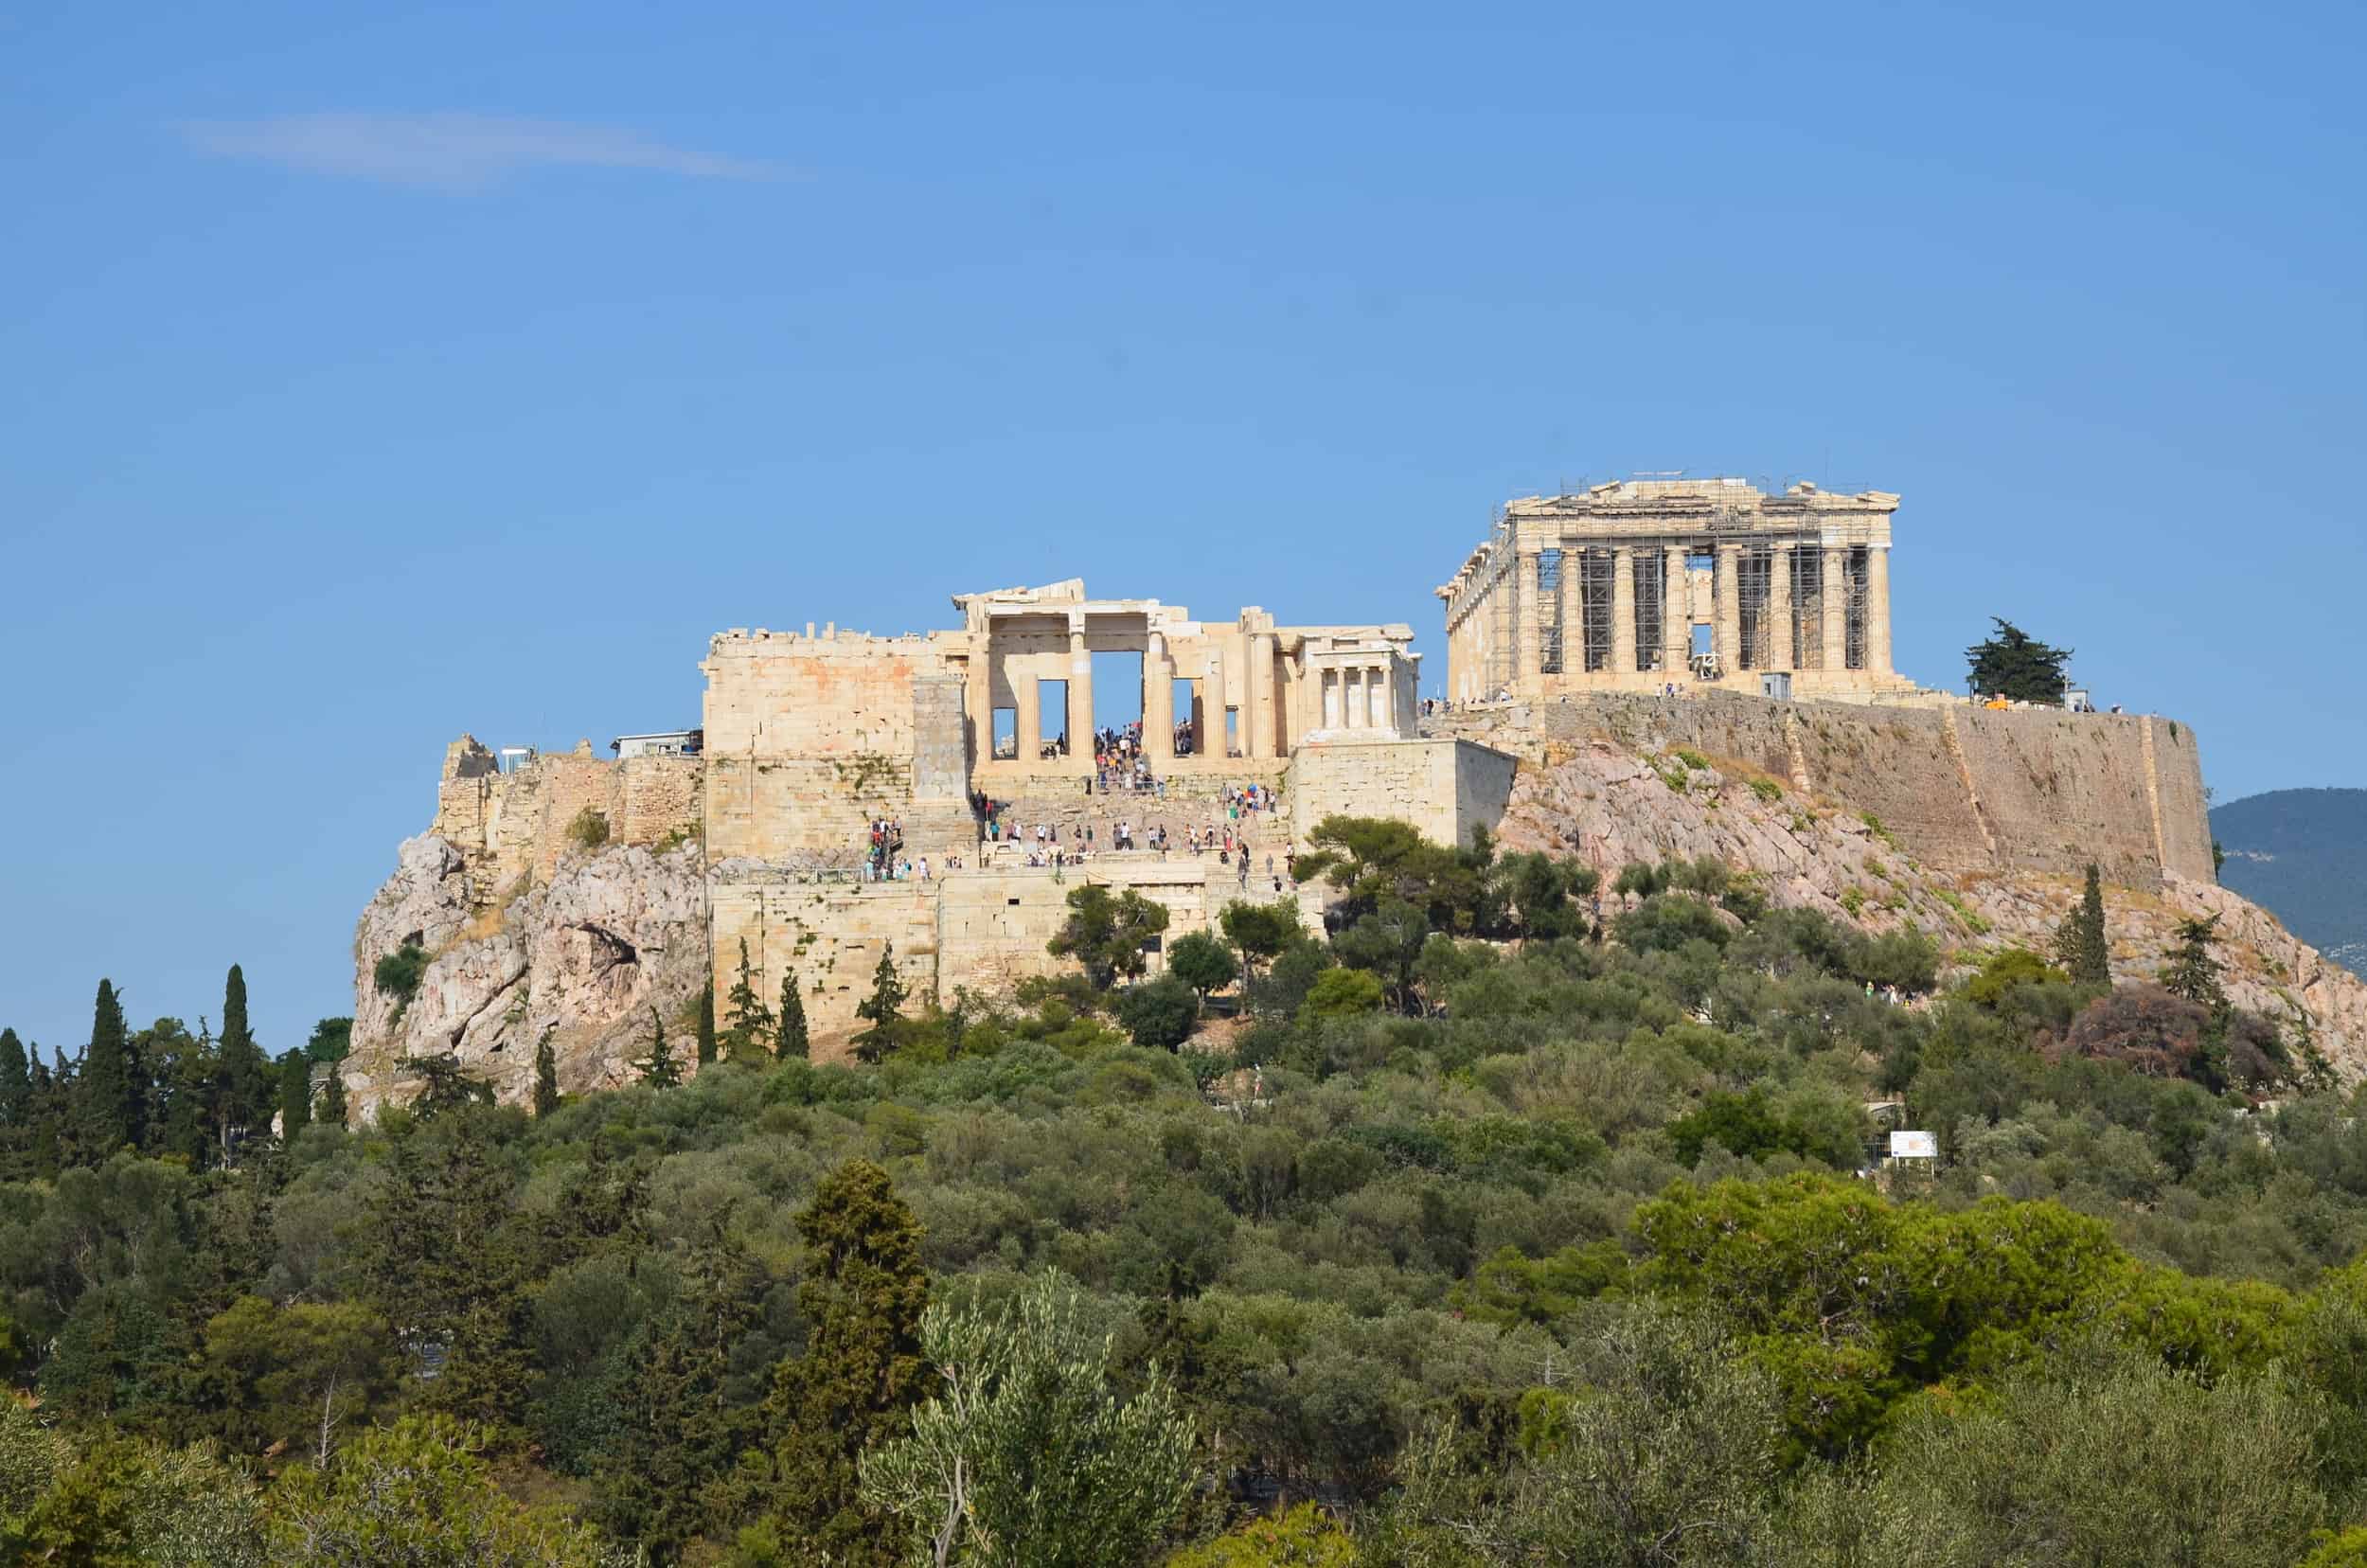 View from the Pnyx of the Acropolis of Athens, Greece